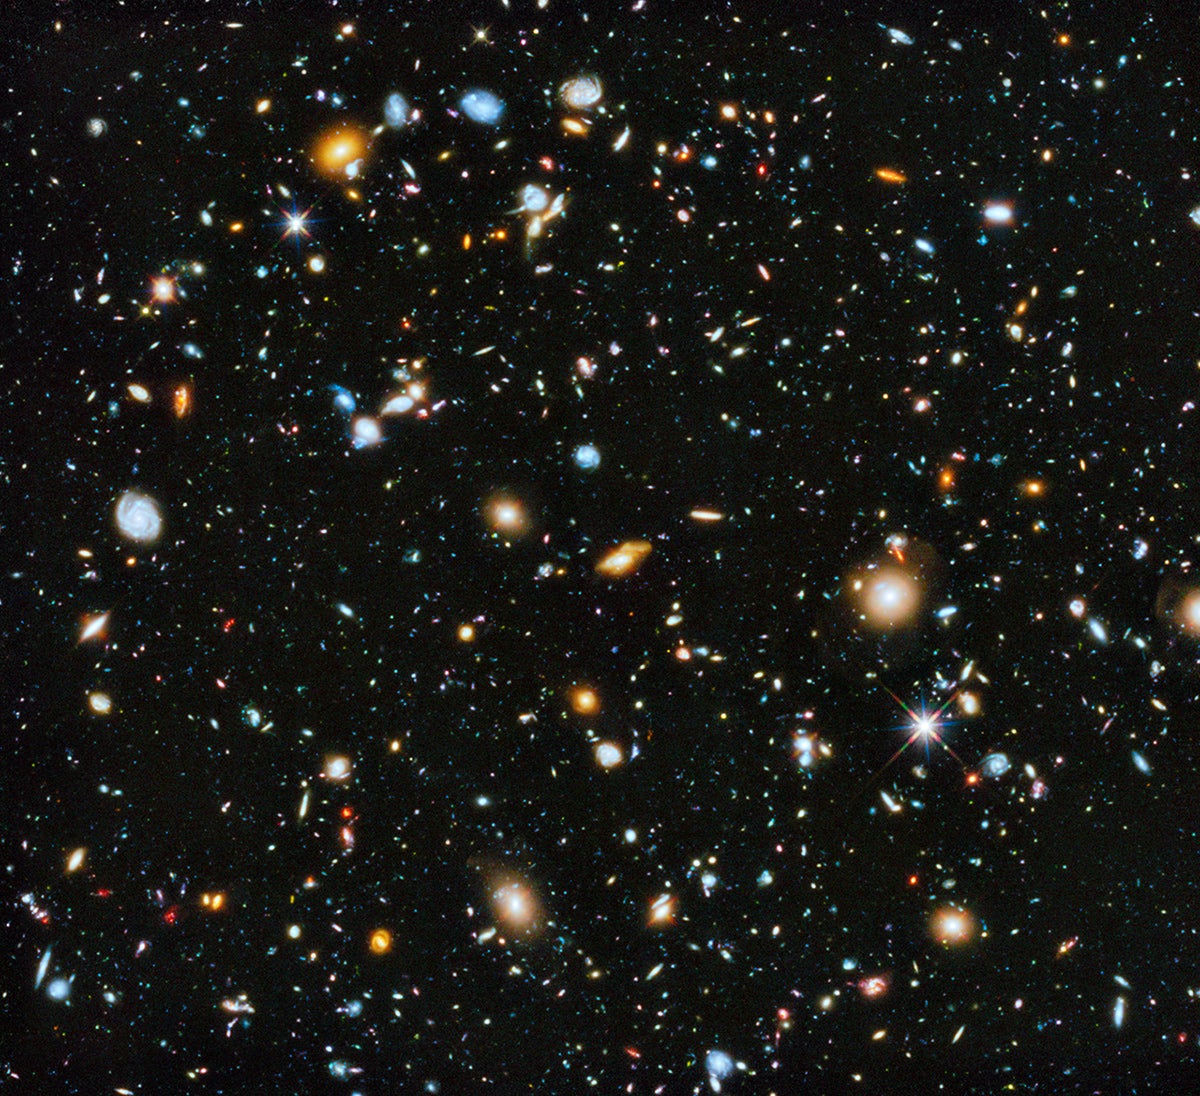 The new image of our Universe from the Hubble Ultra Deep Field survey.